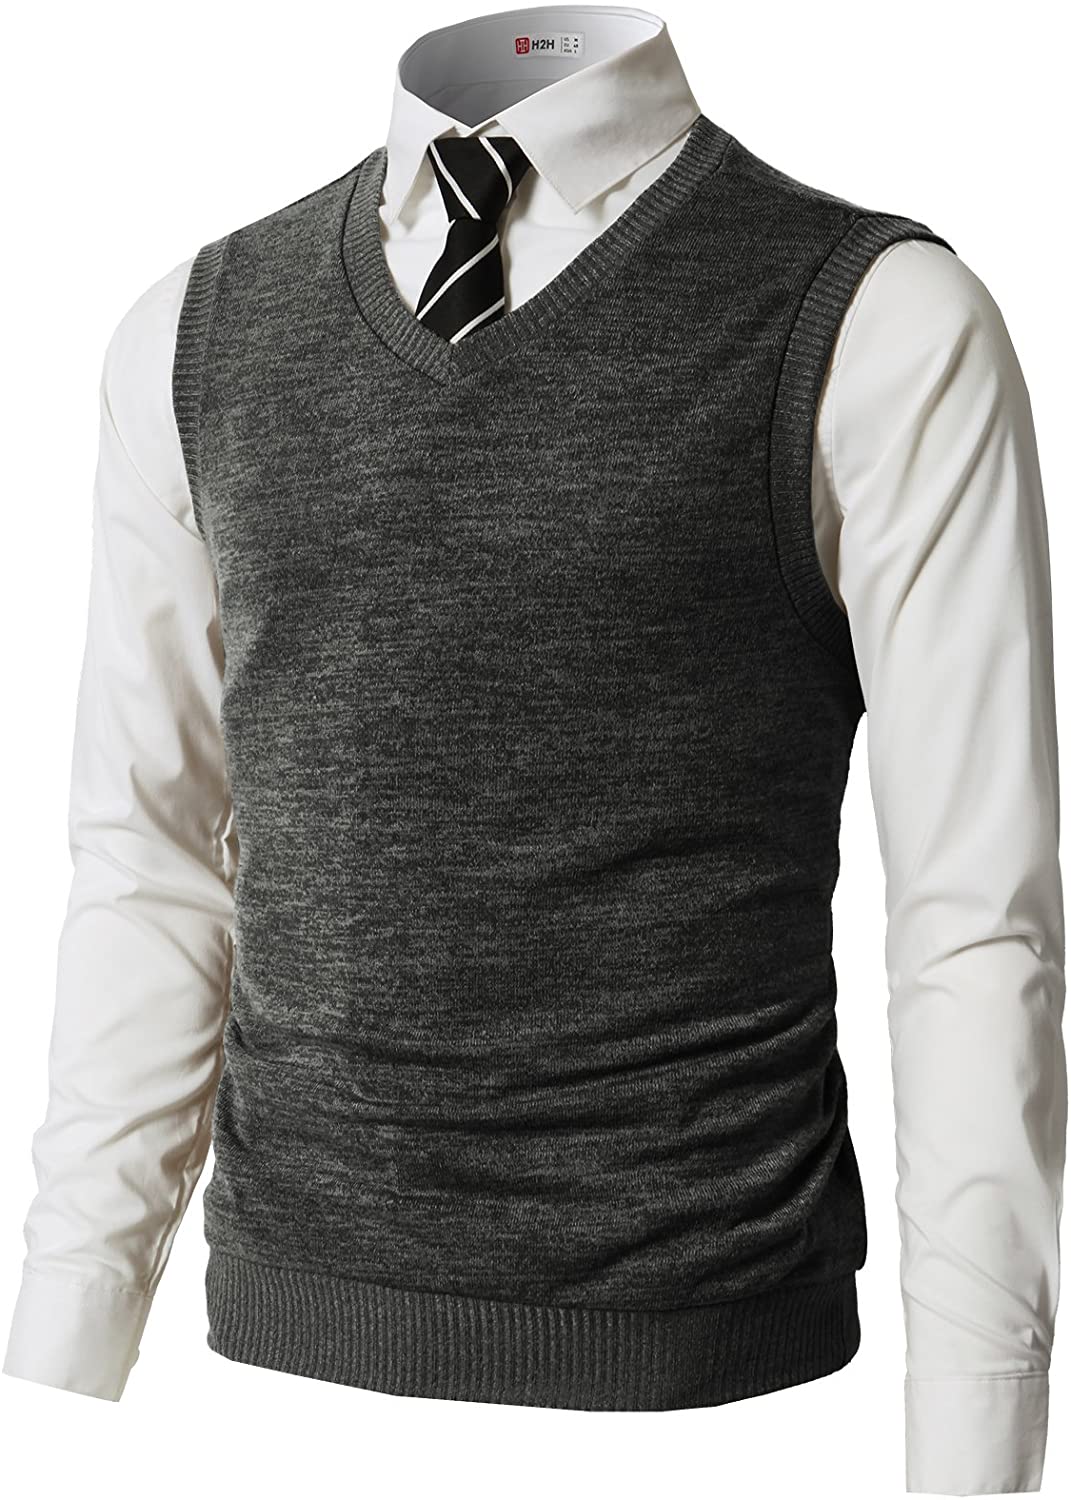 H2H Mens Casual Slim Fit Pullover Sweaters Vest Lightweight Knitted Thermal Basi